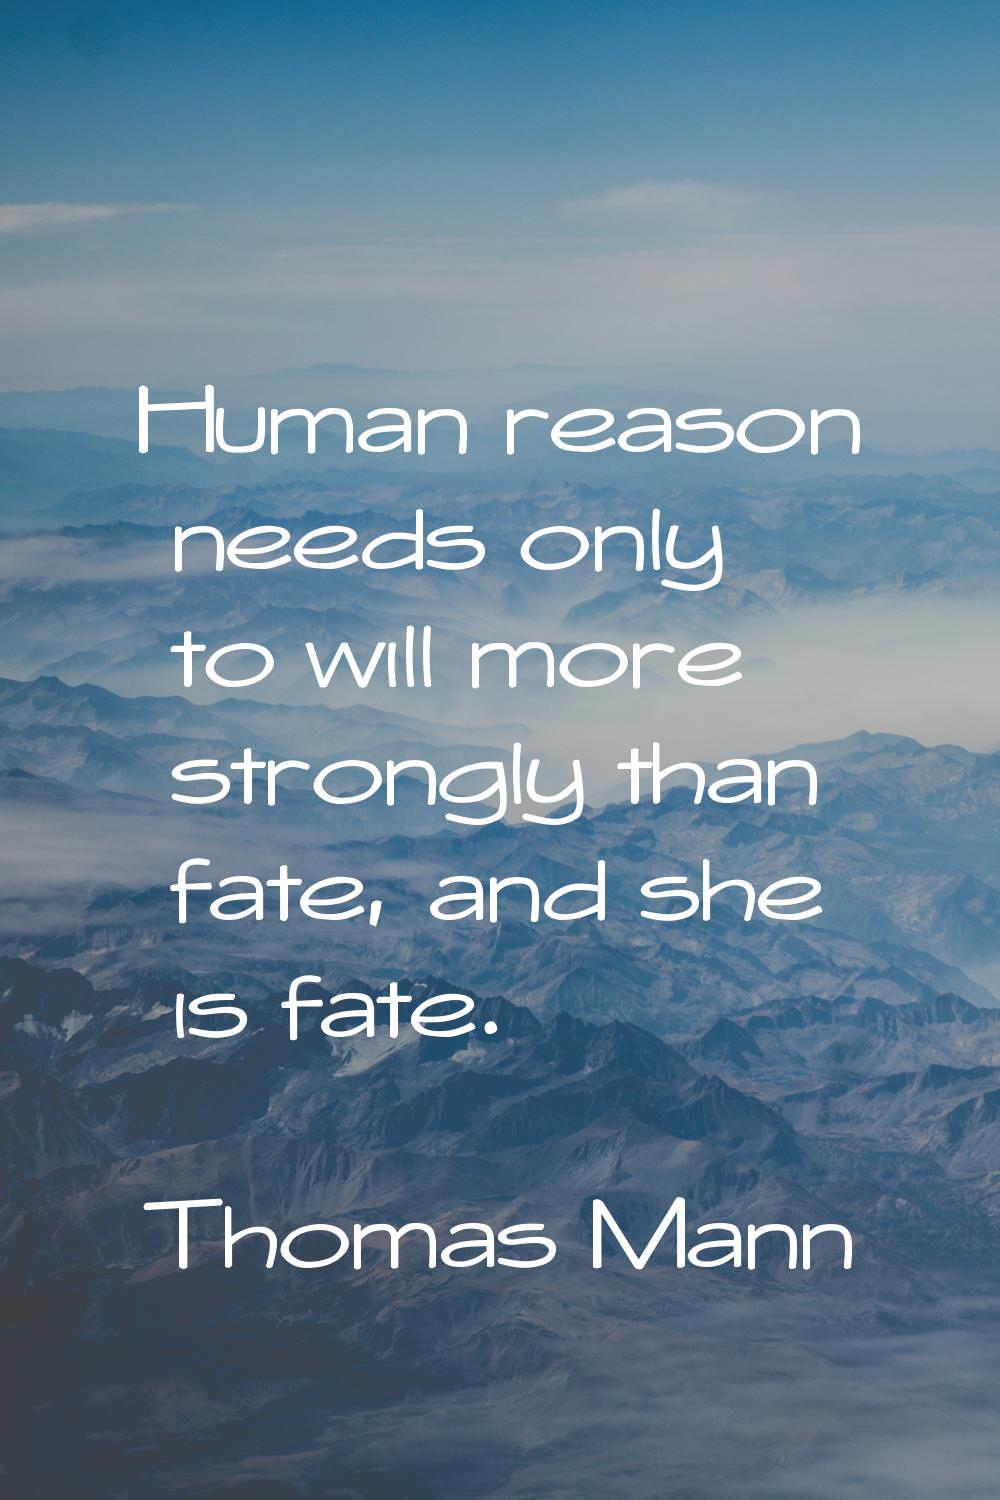 Human reason needs only to will more strongly than fate, and she is fate.